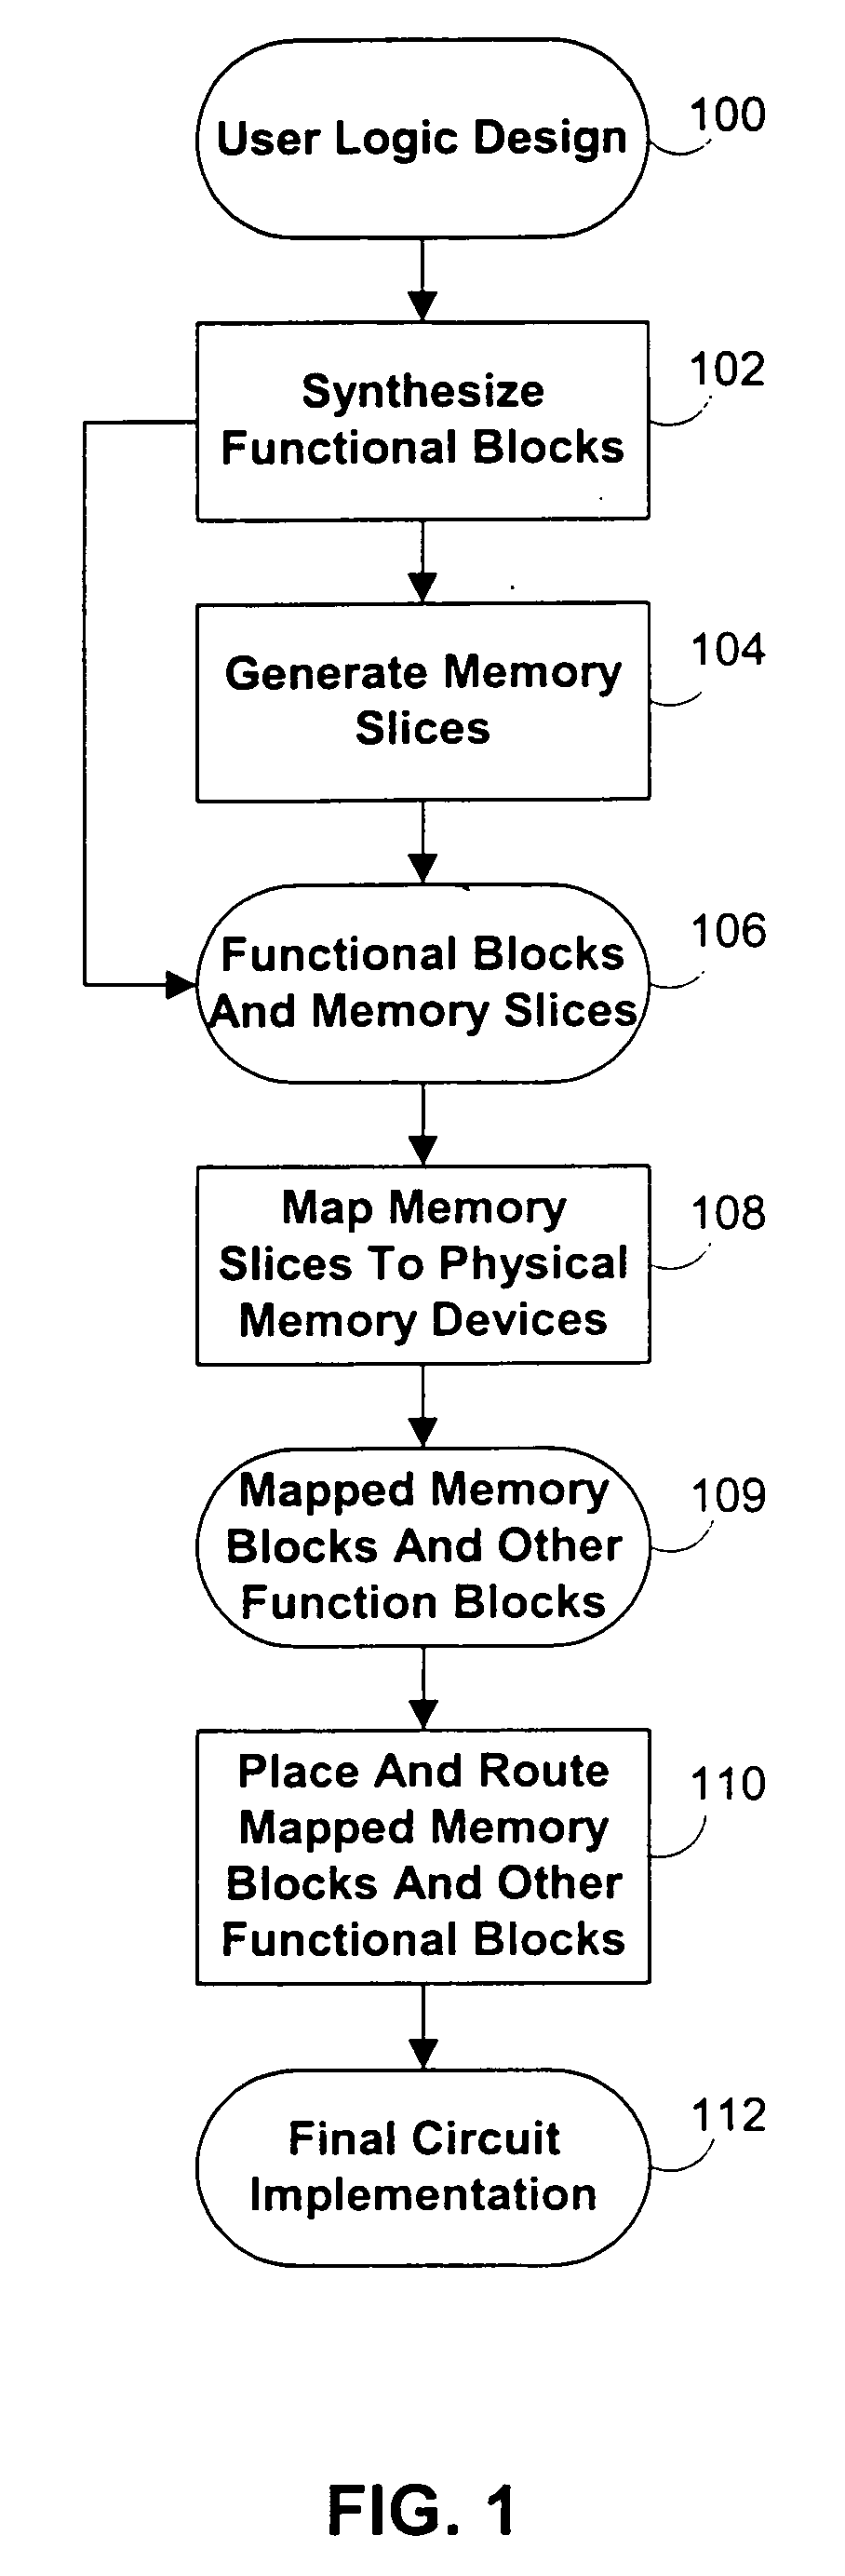 Method for mapping logic design memory into physical memory devices of a programmable logic device